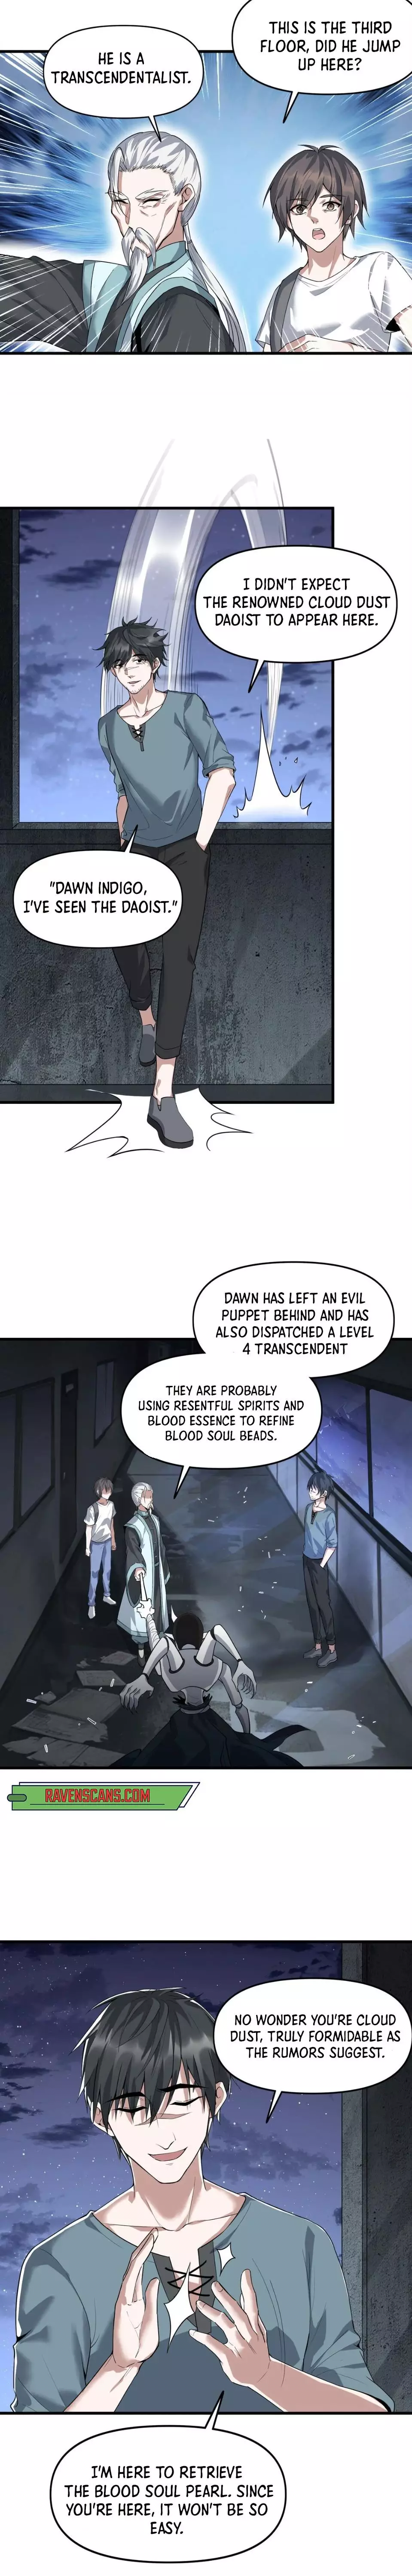 Following After The Livestream To Immoral Cultivate - 5 page 15-36e2cdab